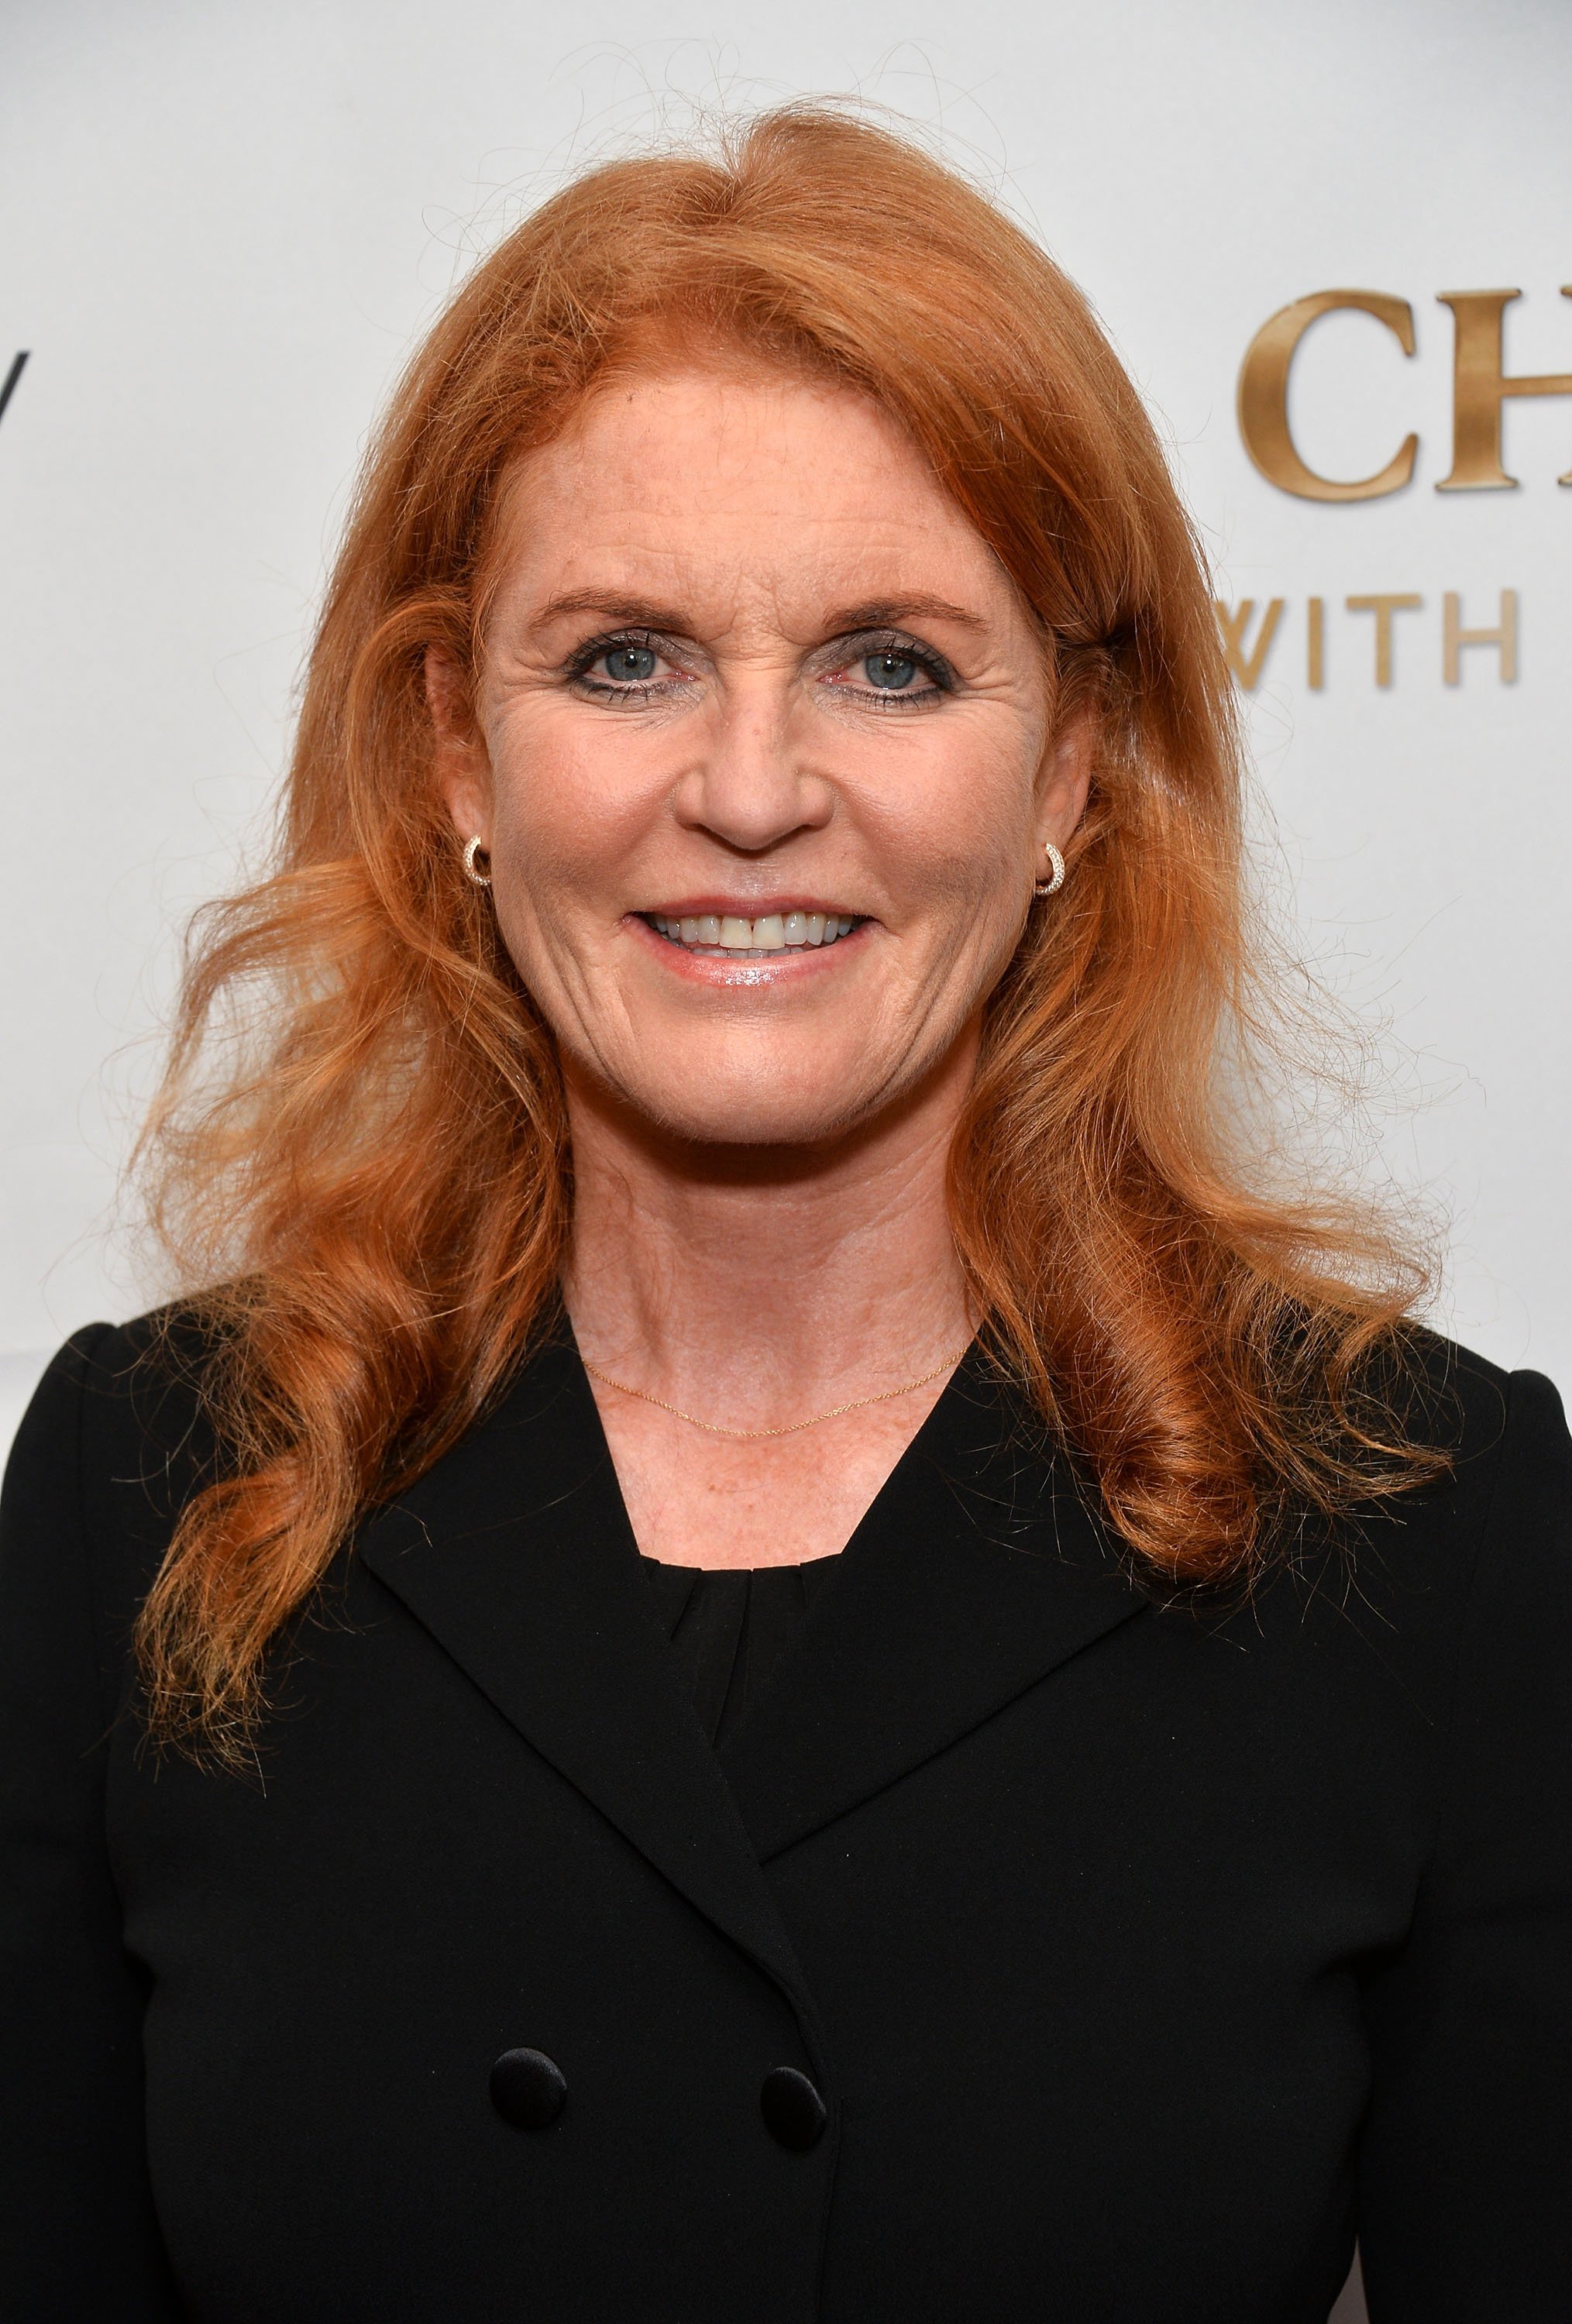 The Duchess of York, Sarah Ferguson arriving at The British American Business Council Los Angeles 54th Annual Christmas Luncheon at the Fairmont Miramar Hotel on December 13, 2013 in Santa Monica, California. / Source: Getty Images